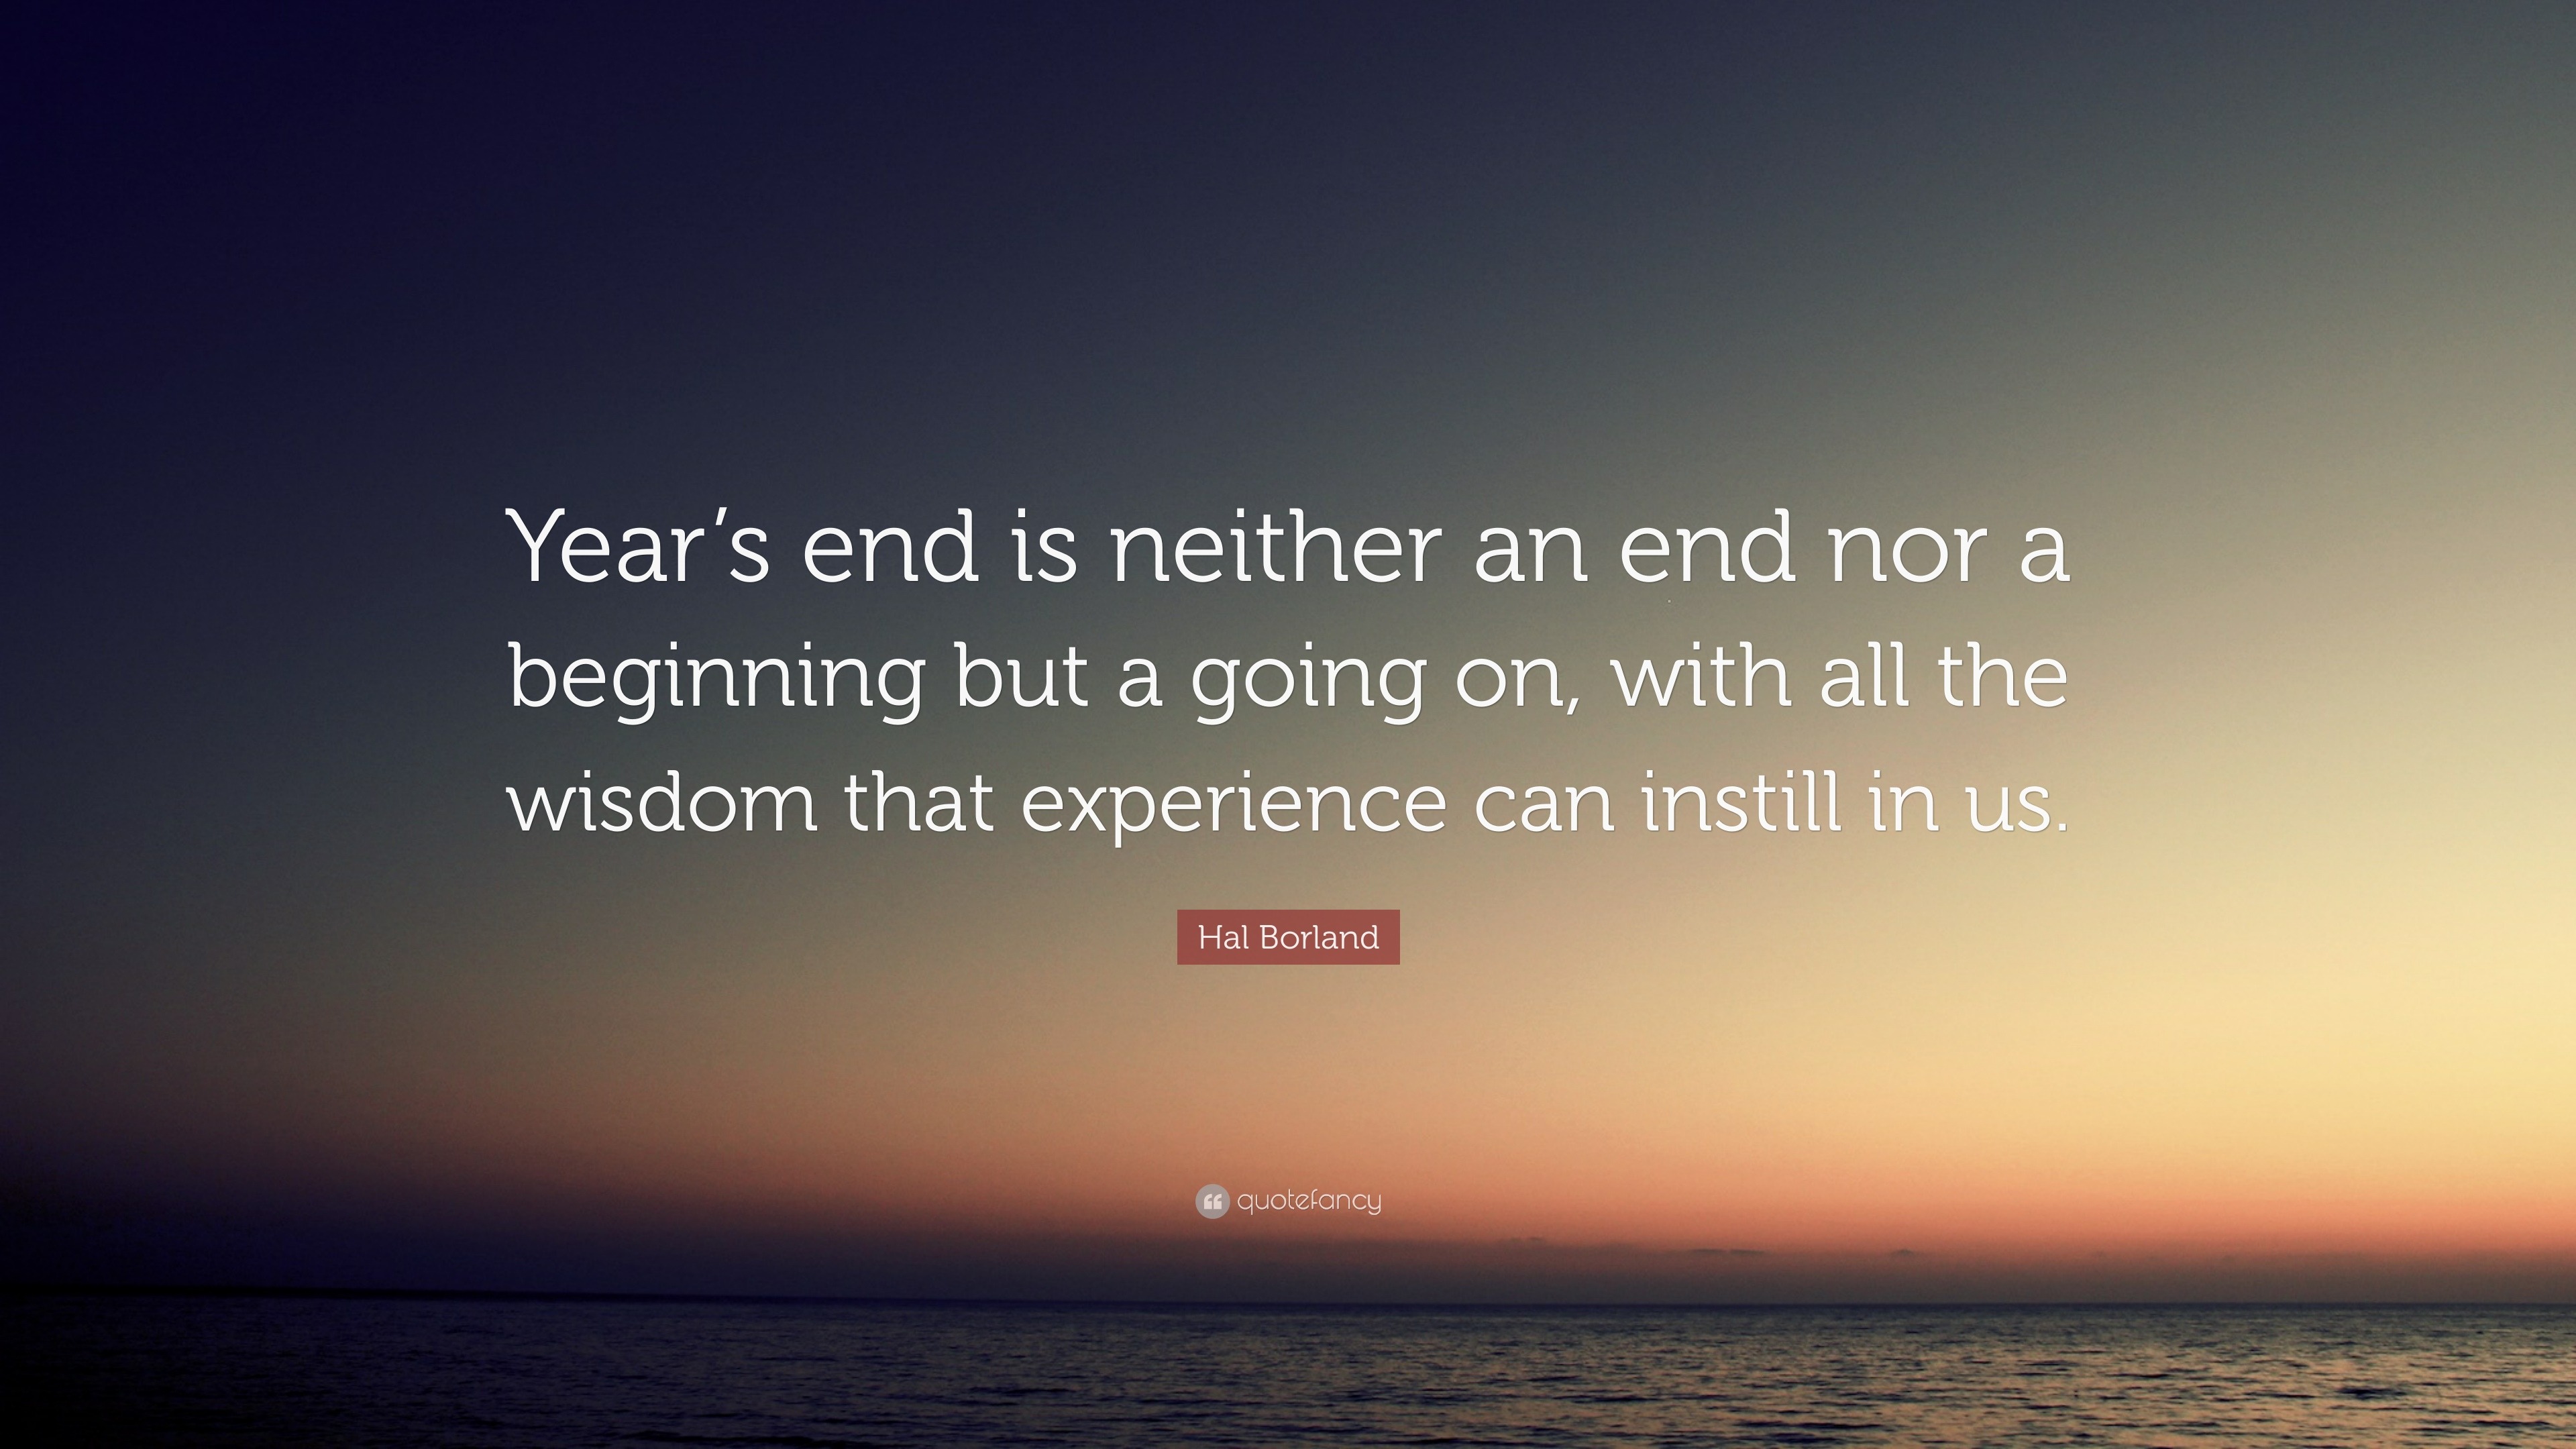 Hal Borland Quote “Year’s end is neither an end nor a beginning but a